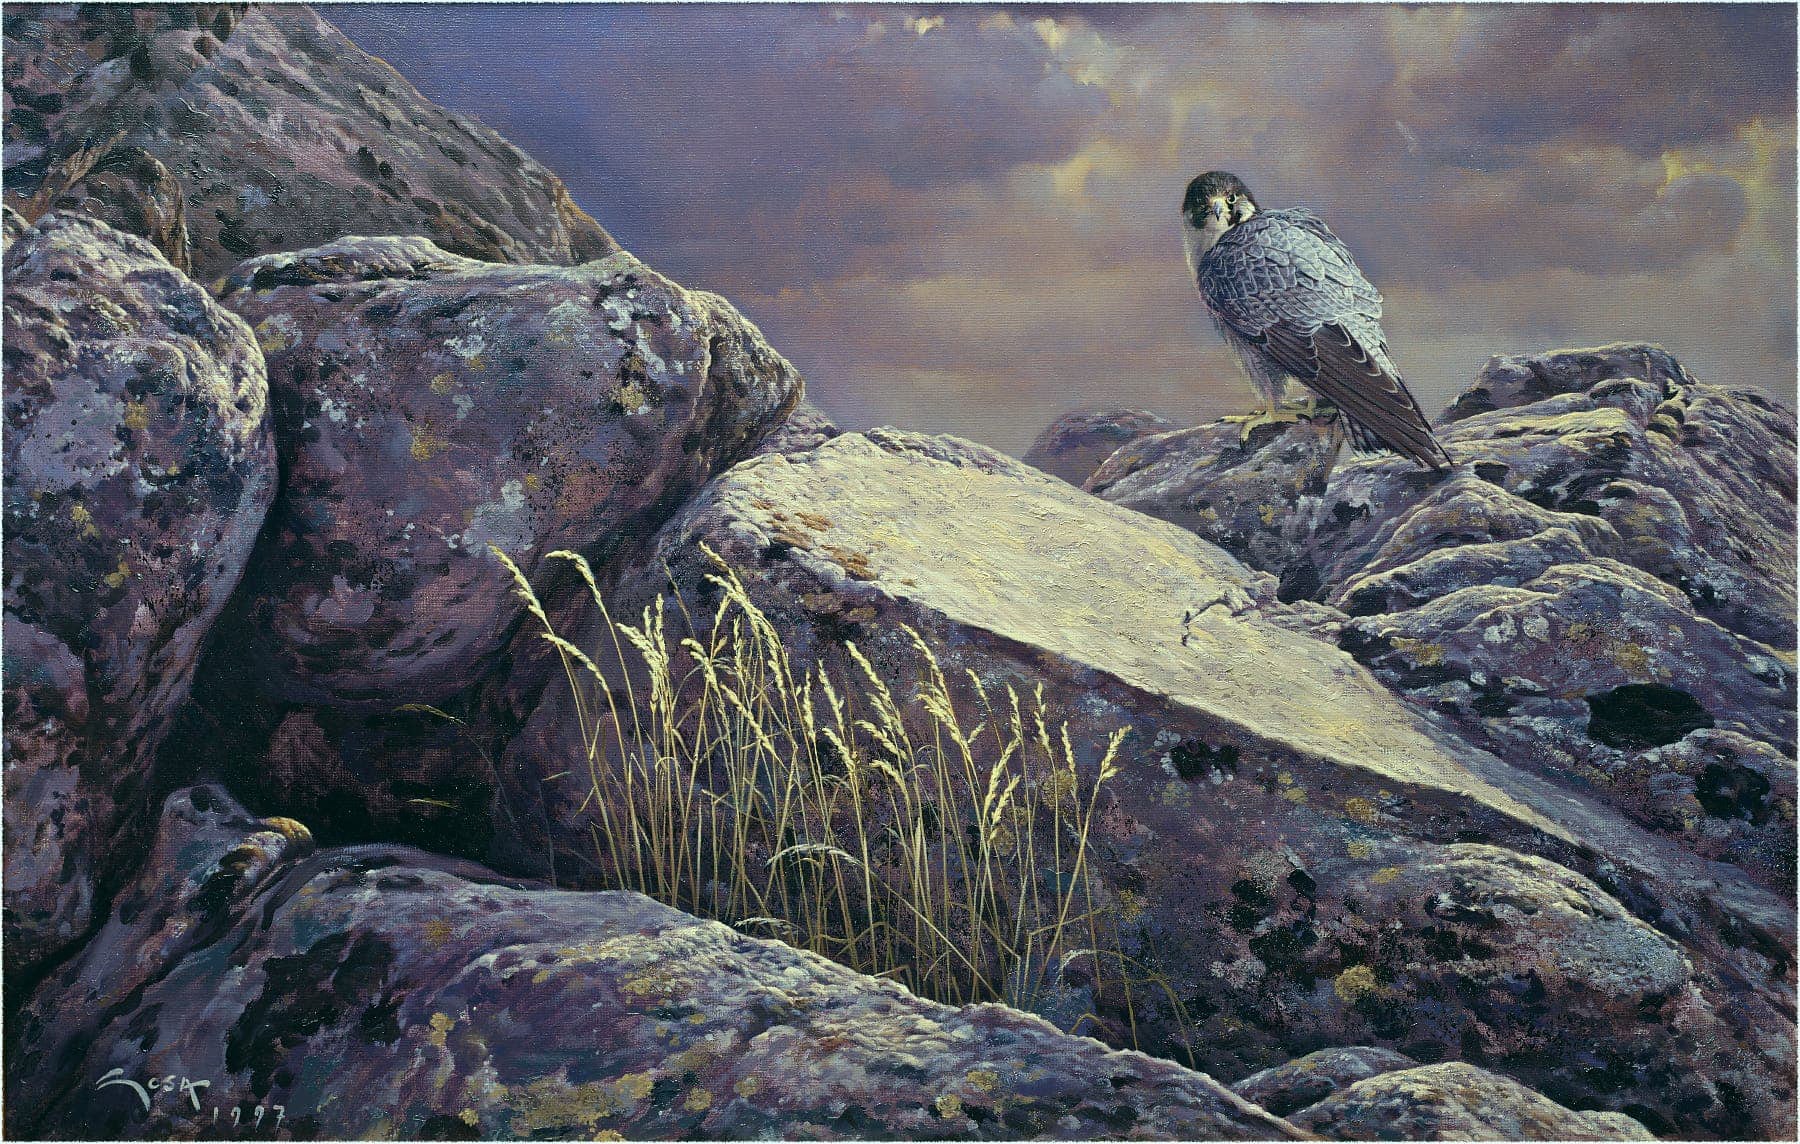 Peregrine falcon oil painting